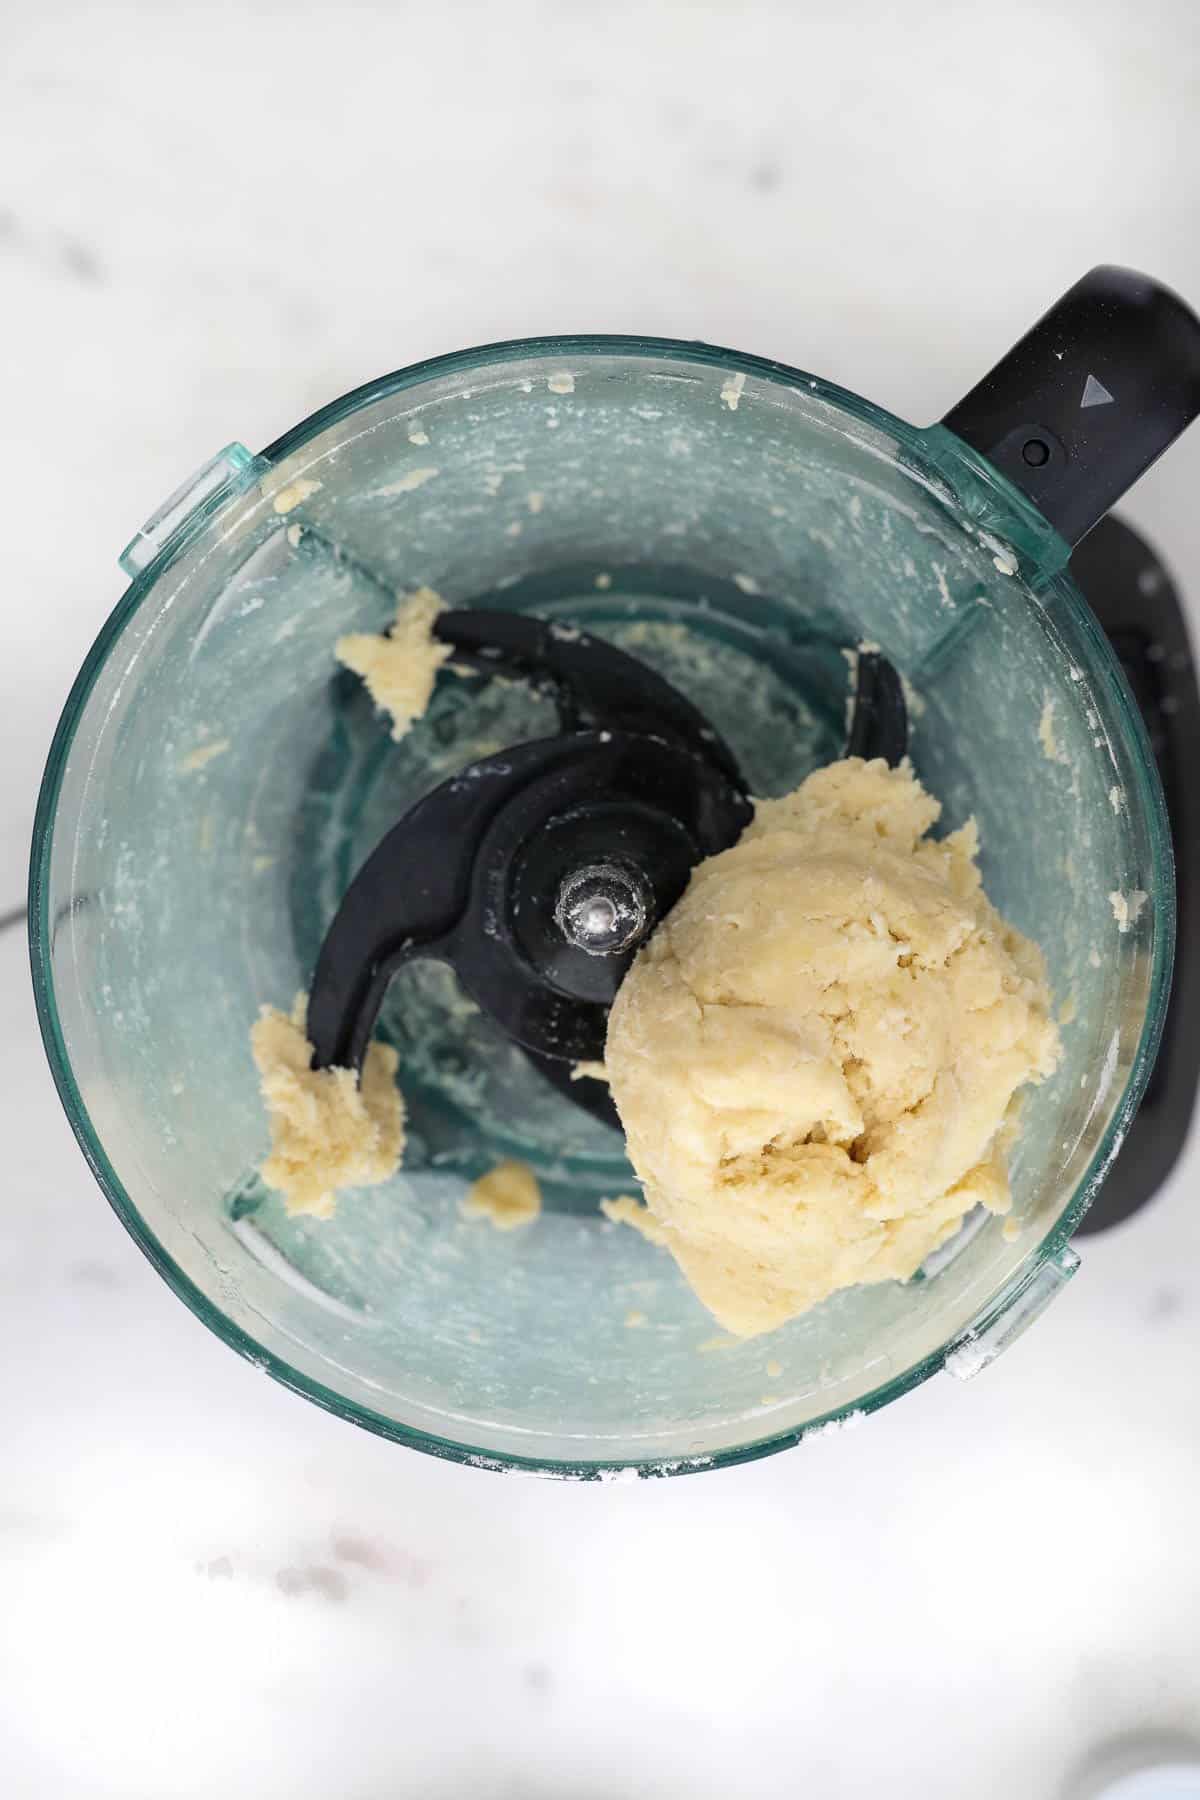 A completed crust dough inside of a food processor